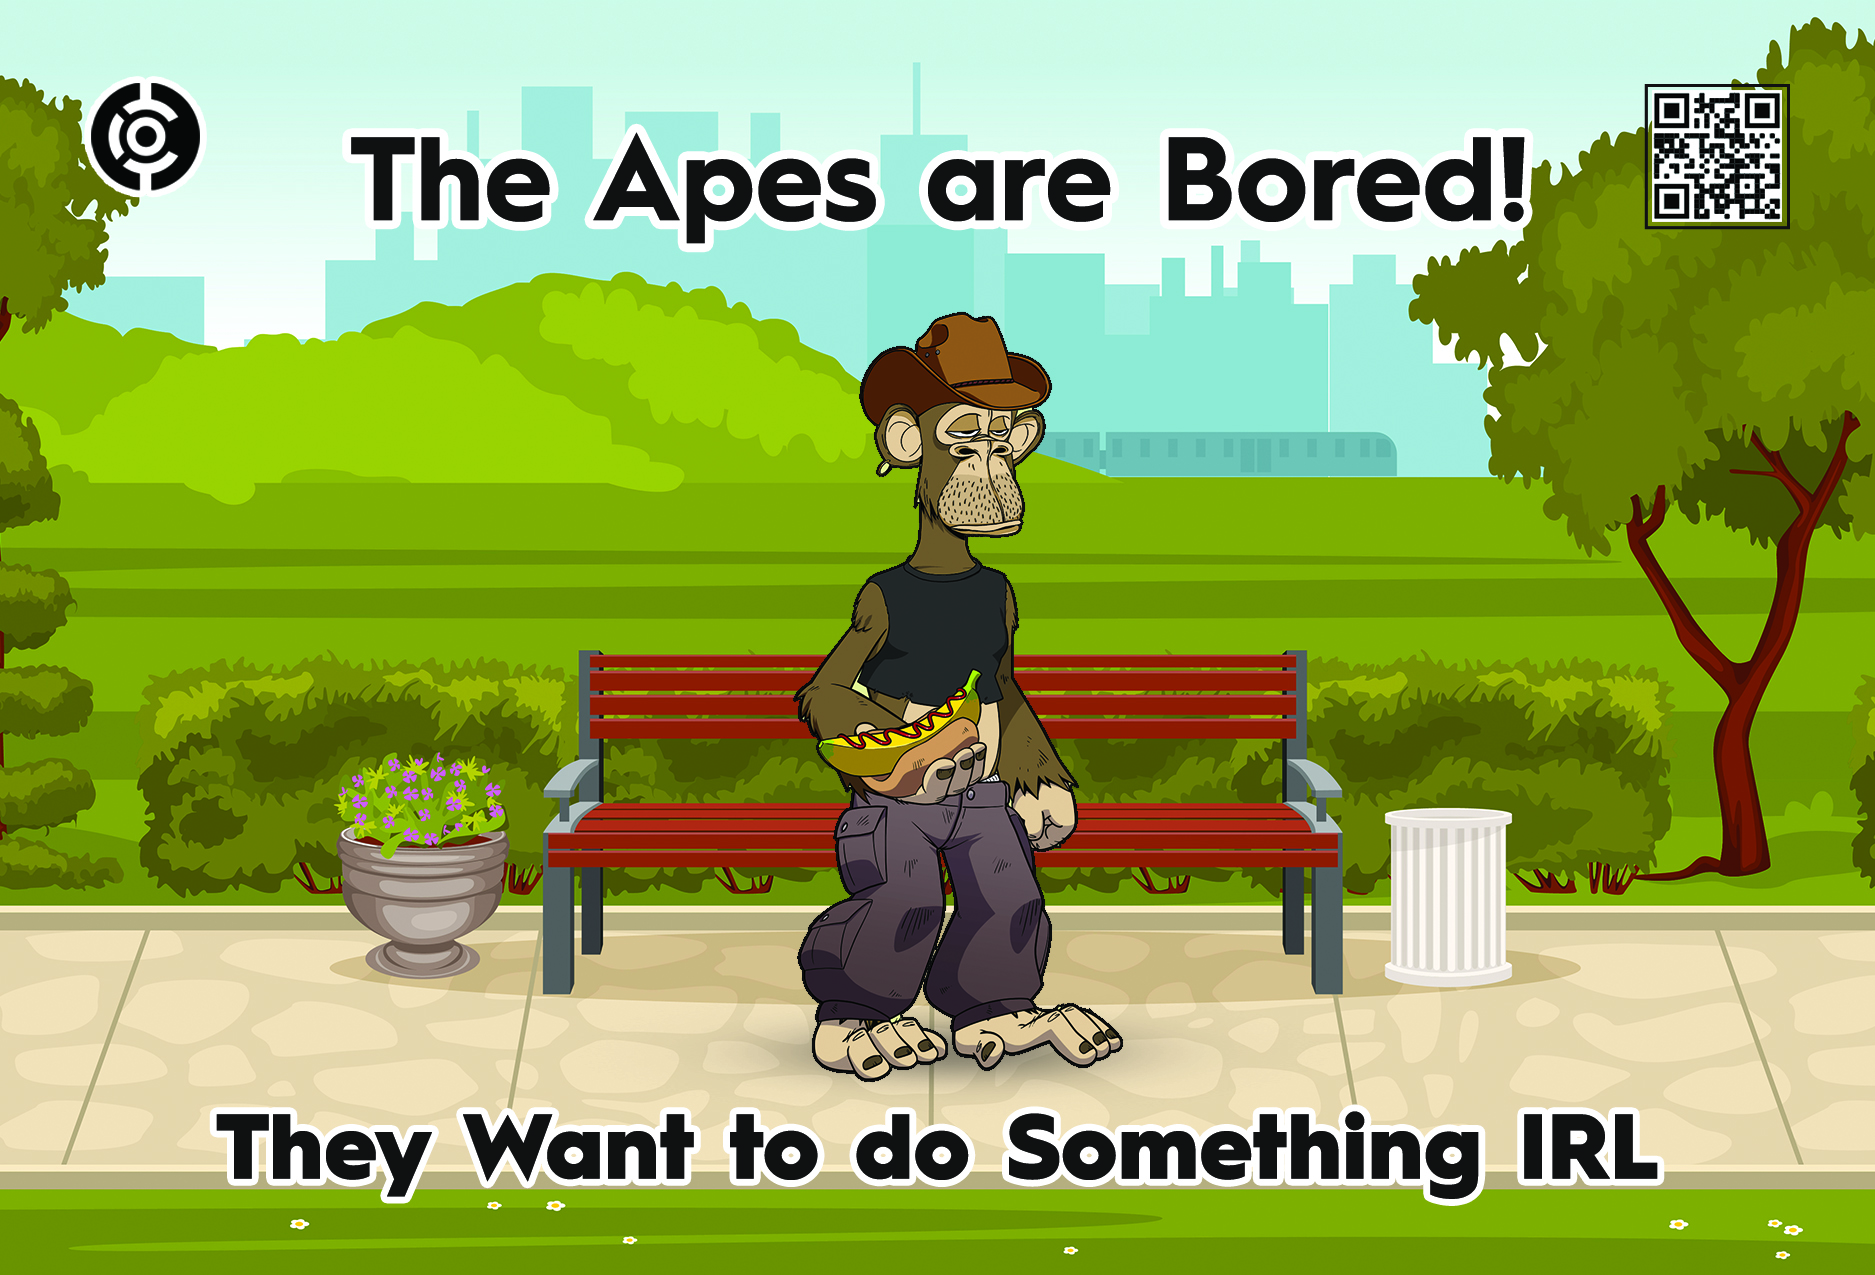 The Apes are Bored. They want to do something IRL